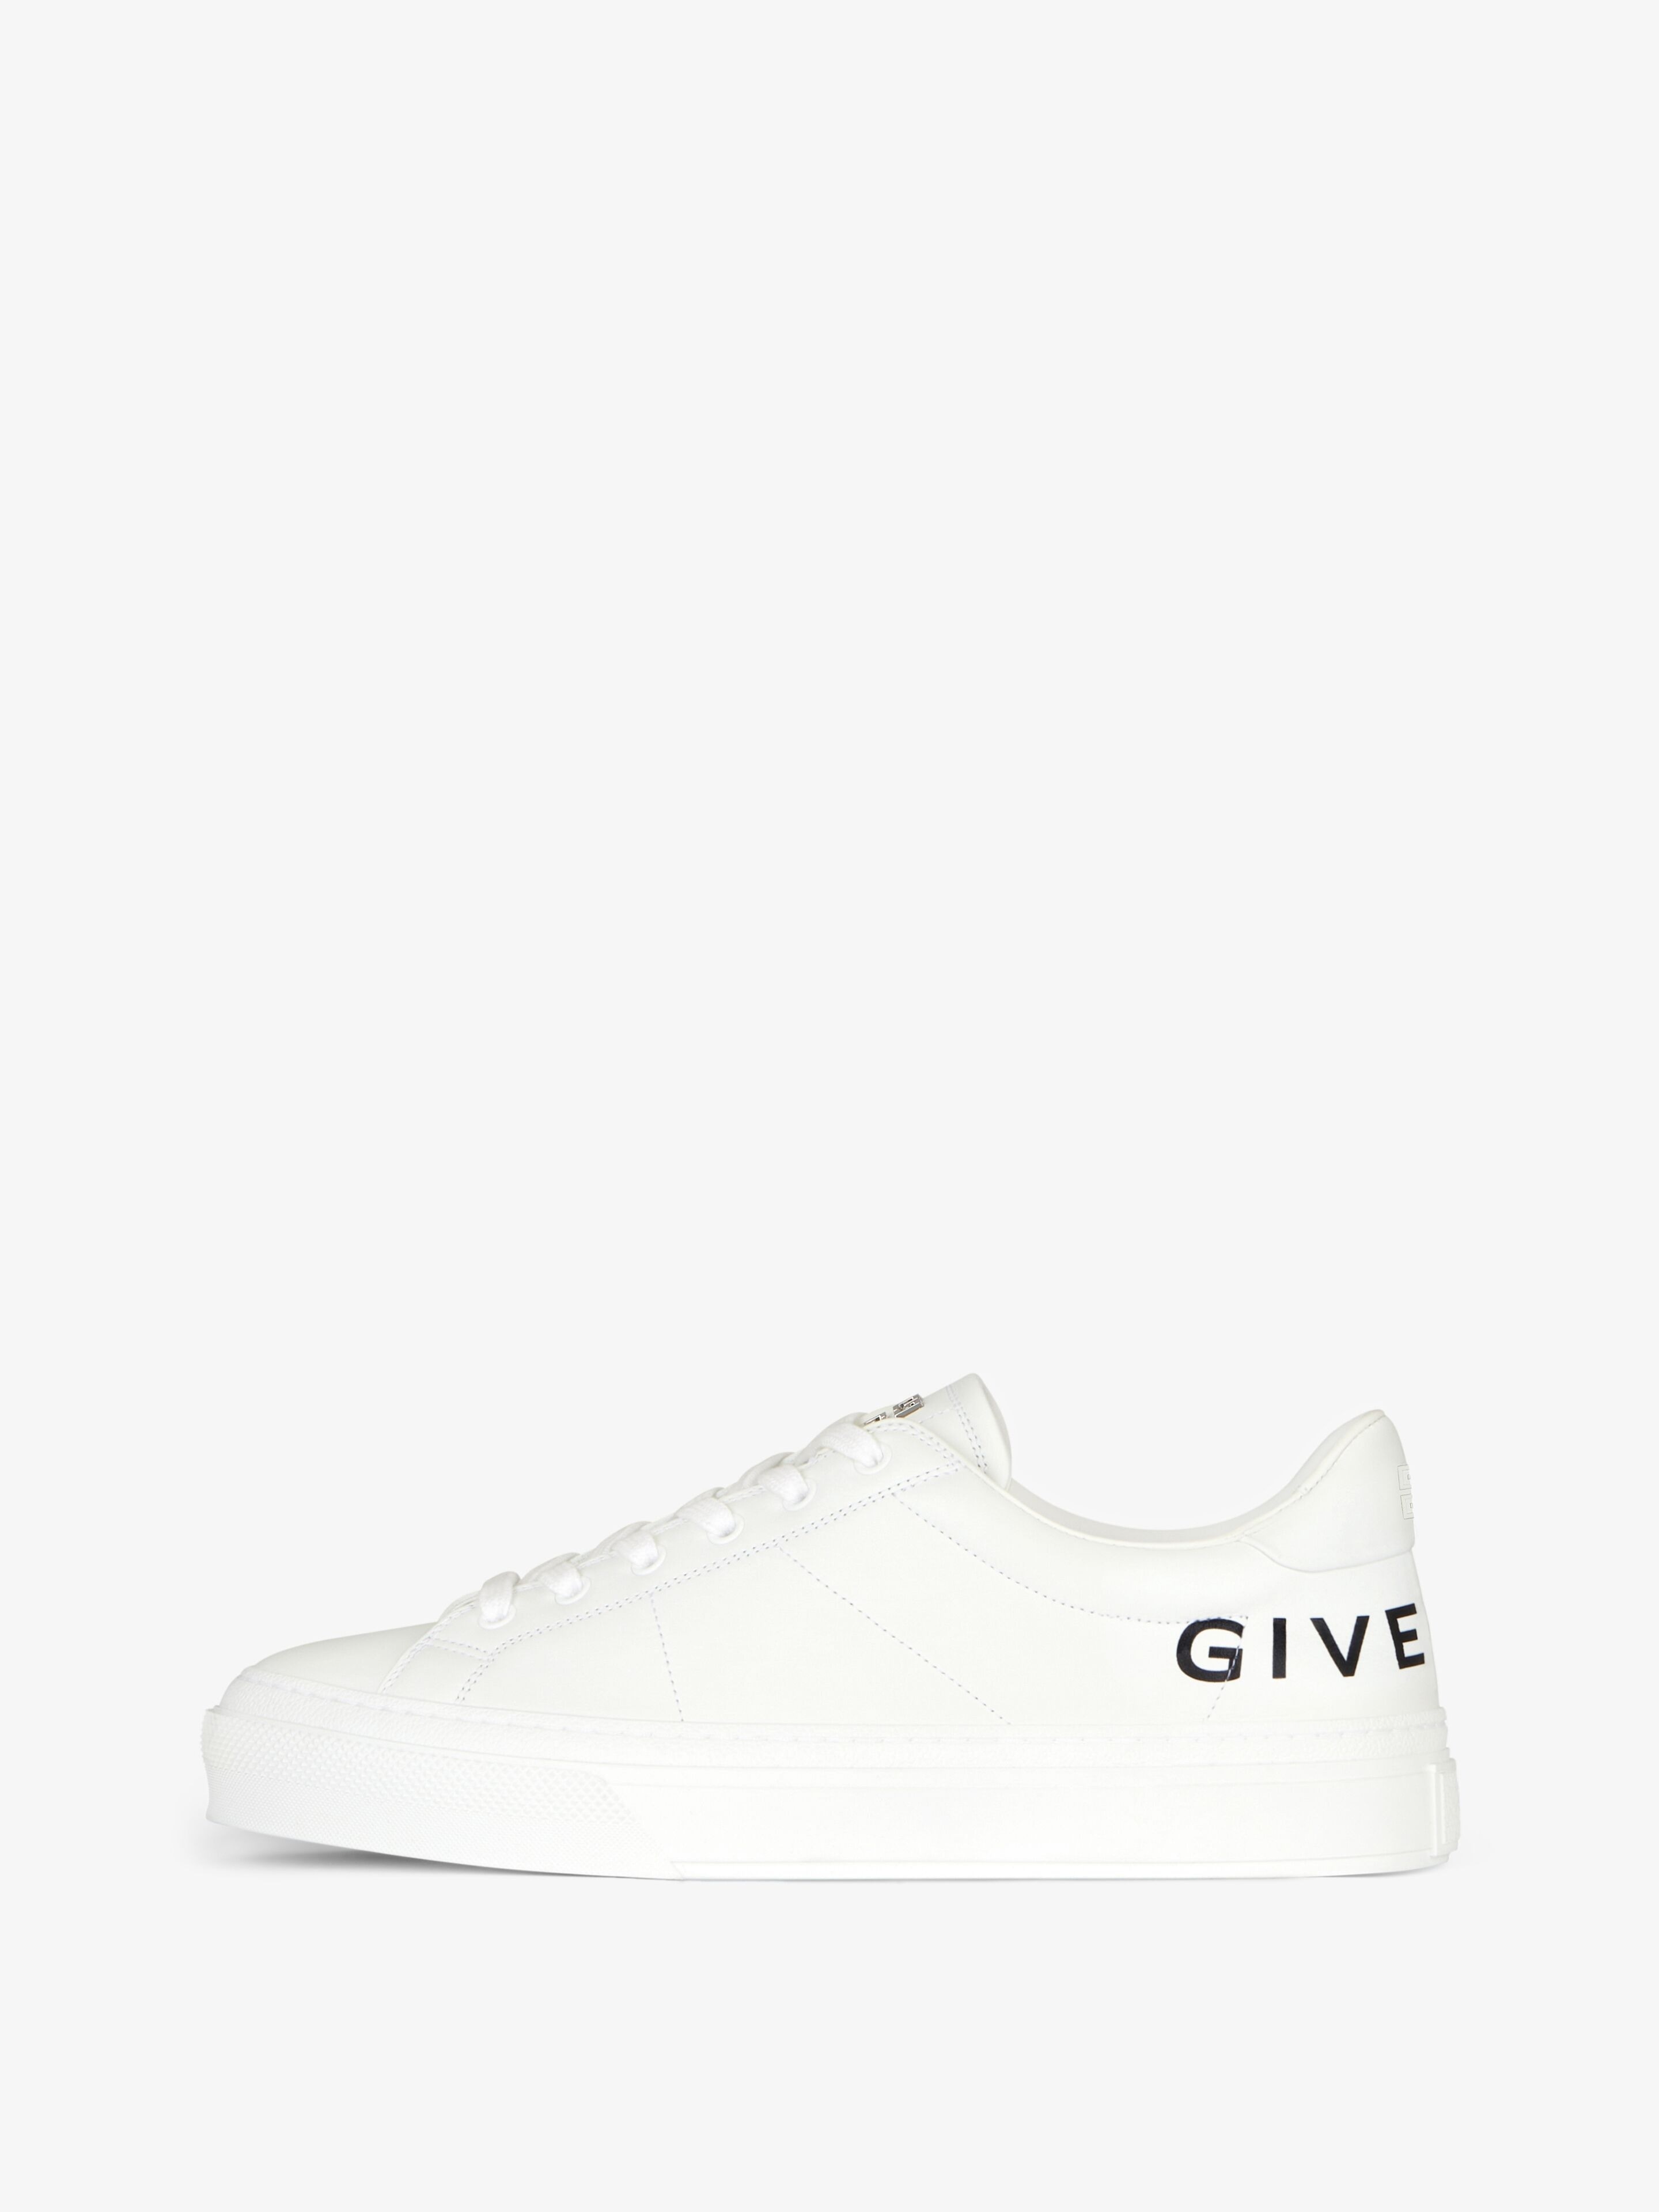 CITY SPORT SNEAKERS IN LEATHER WITH PRINTED GIVENCHY LOGO - 3